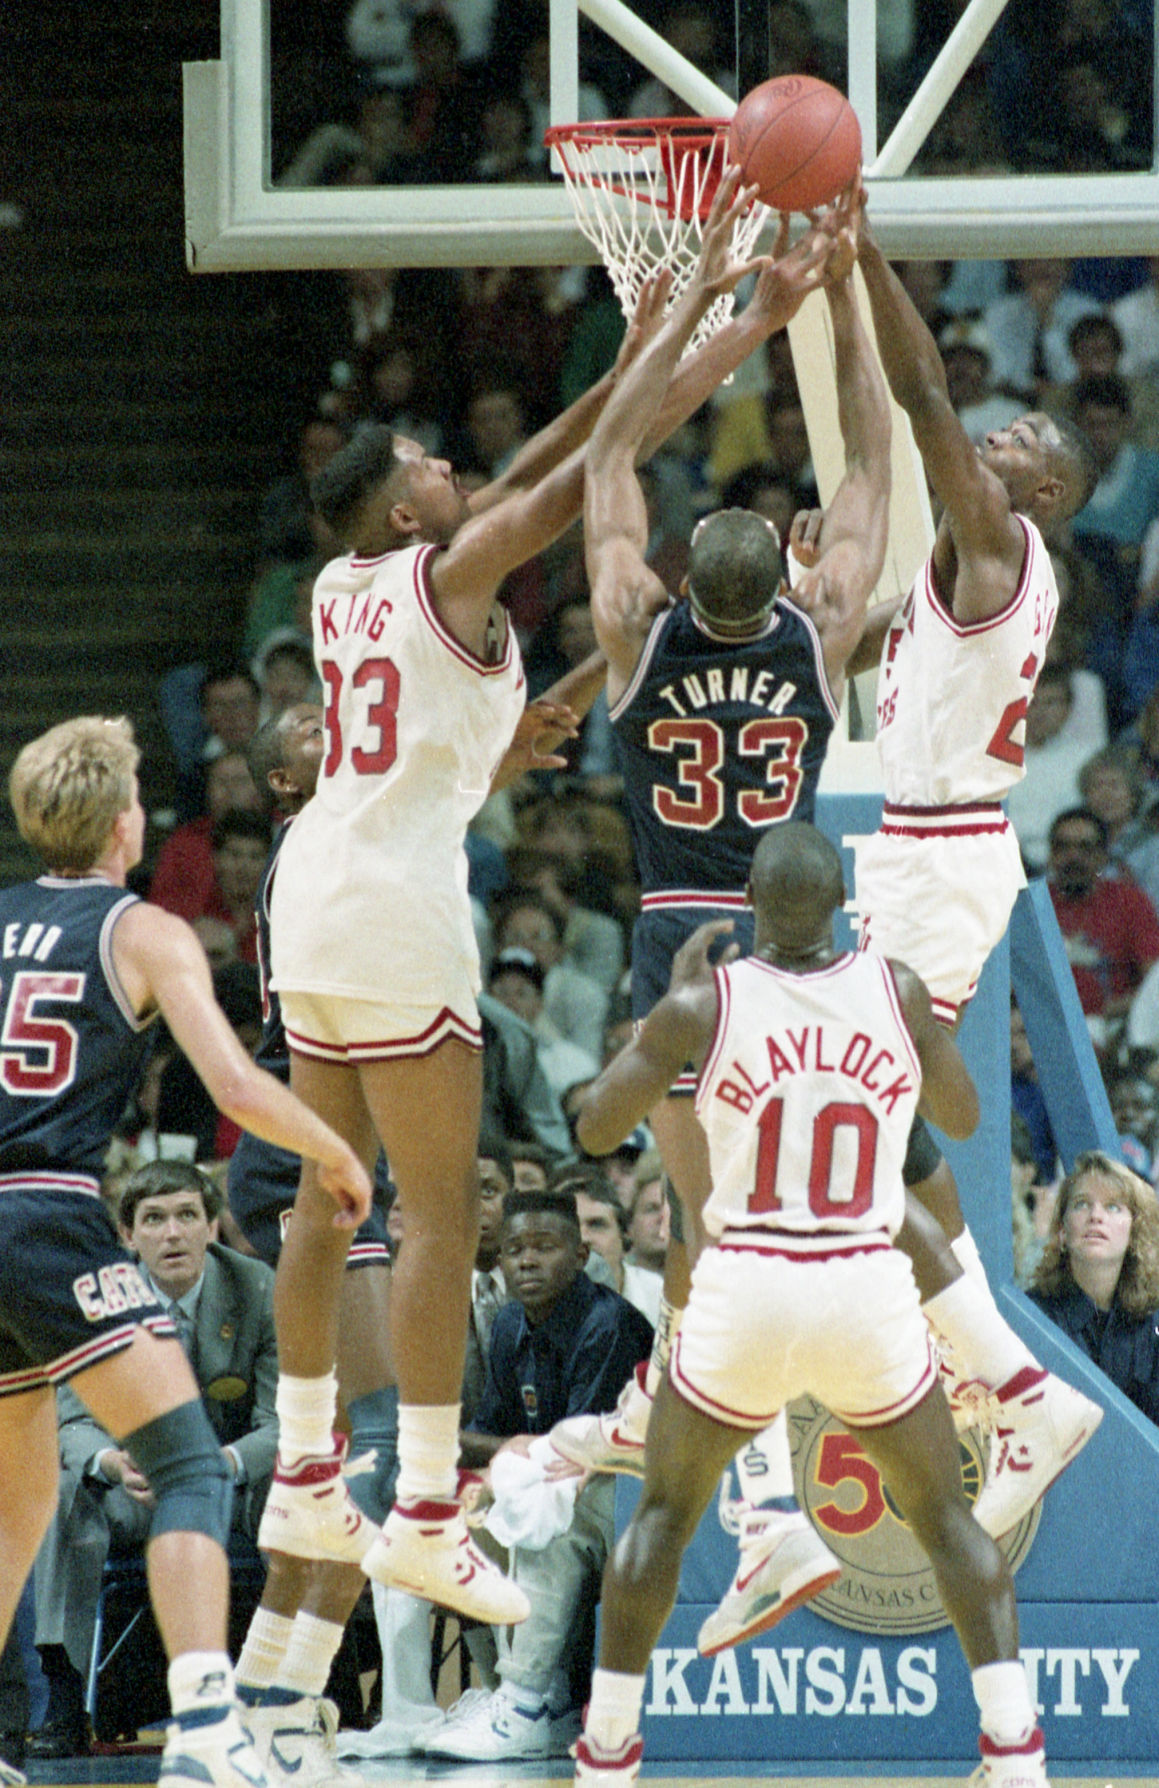 Hansen's Hundred, No. 3: Sean Elliott became a Tucson icon with